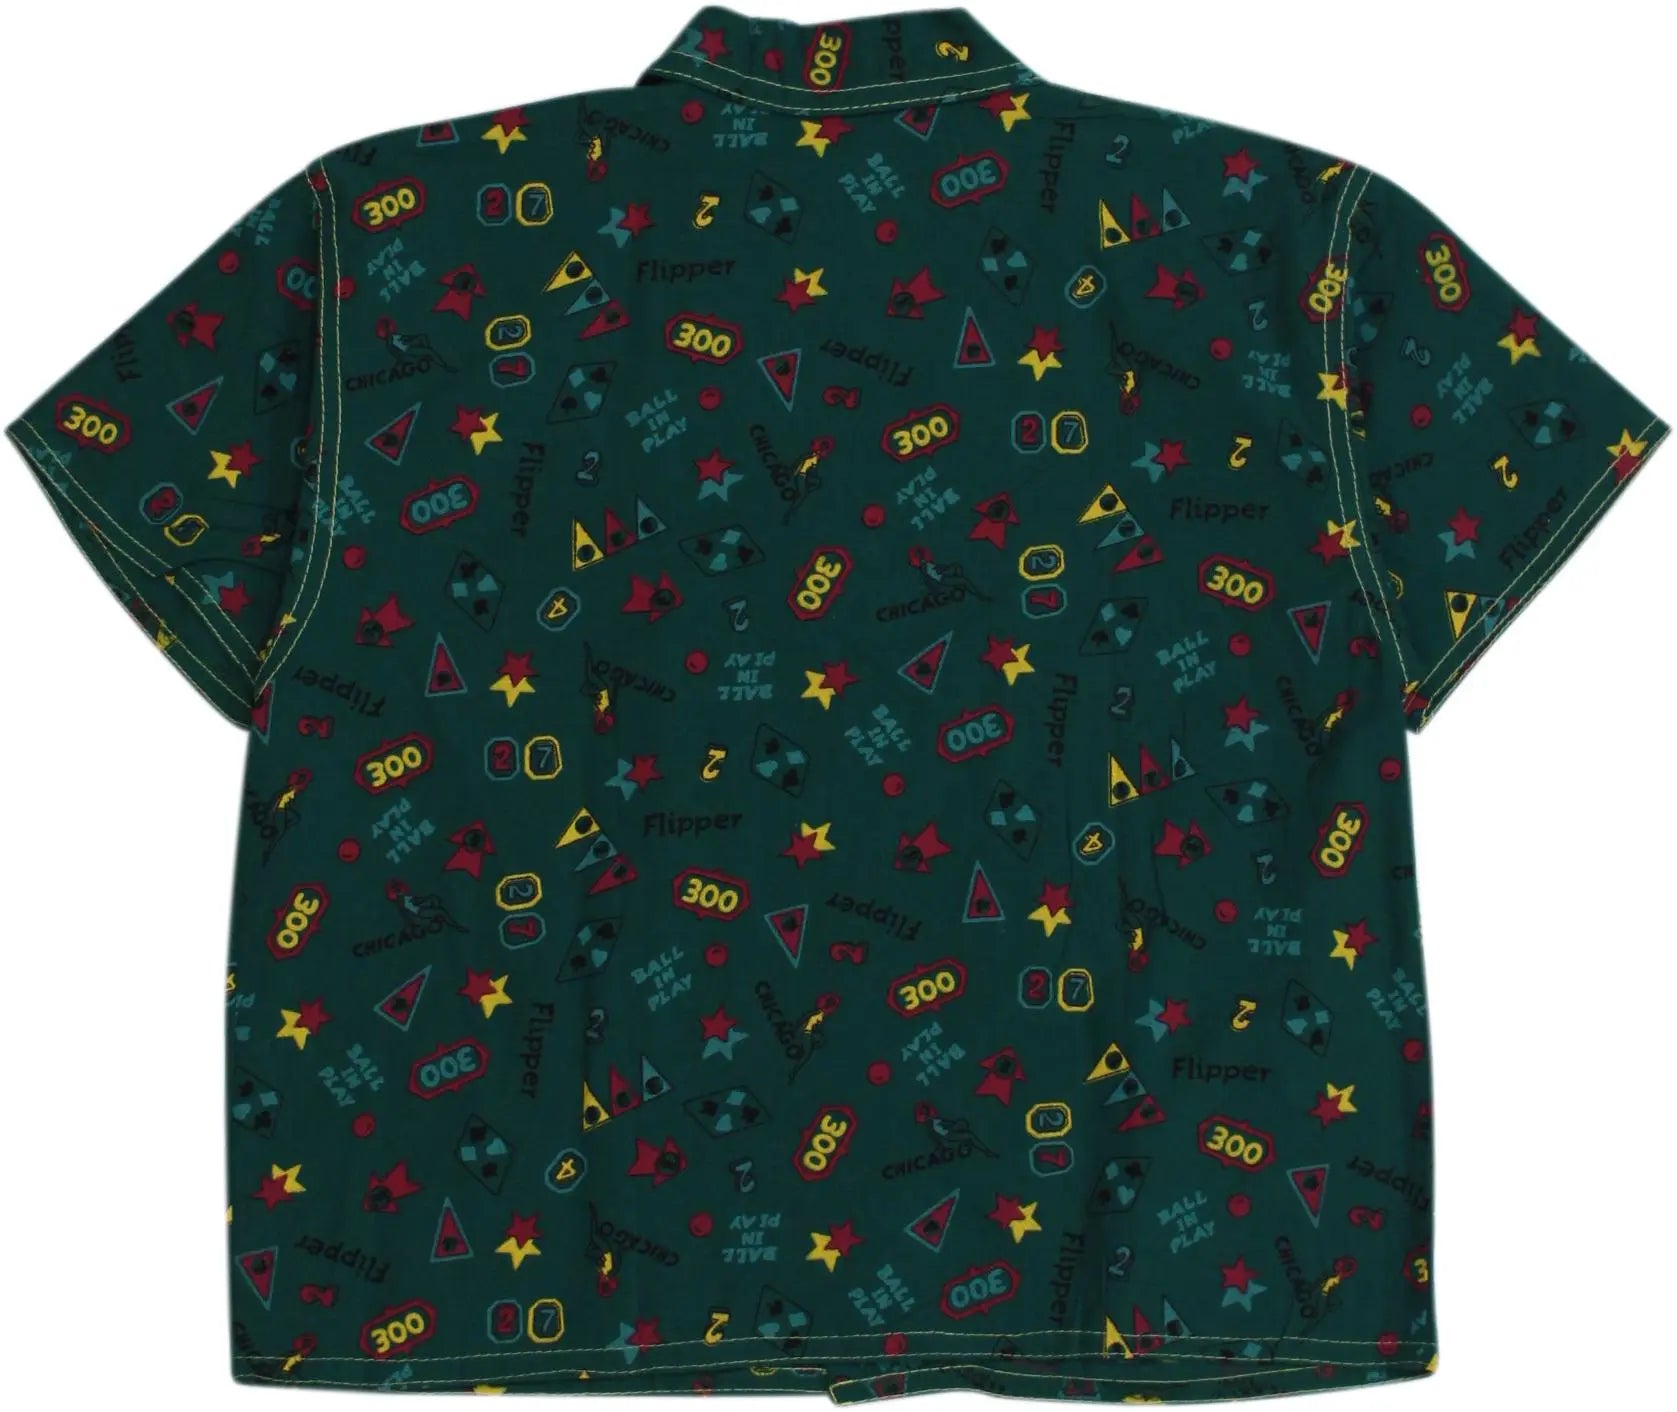 Lemur - Green Short Sleeve Shirt- ThriftTale.com - Vintage and second handclothing